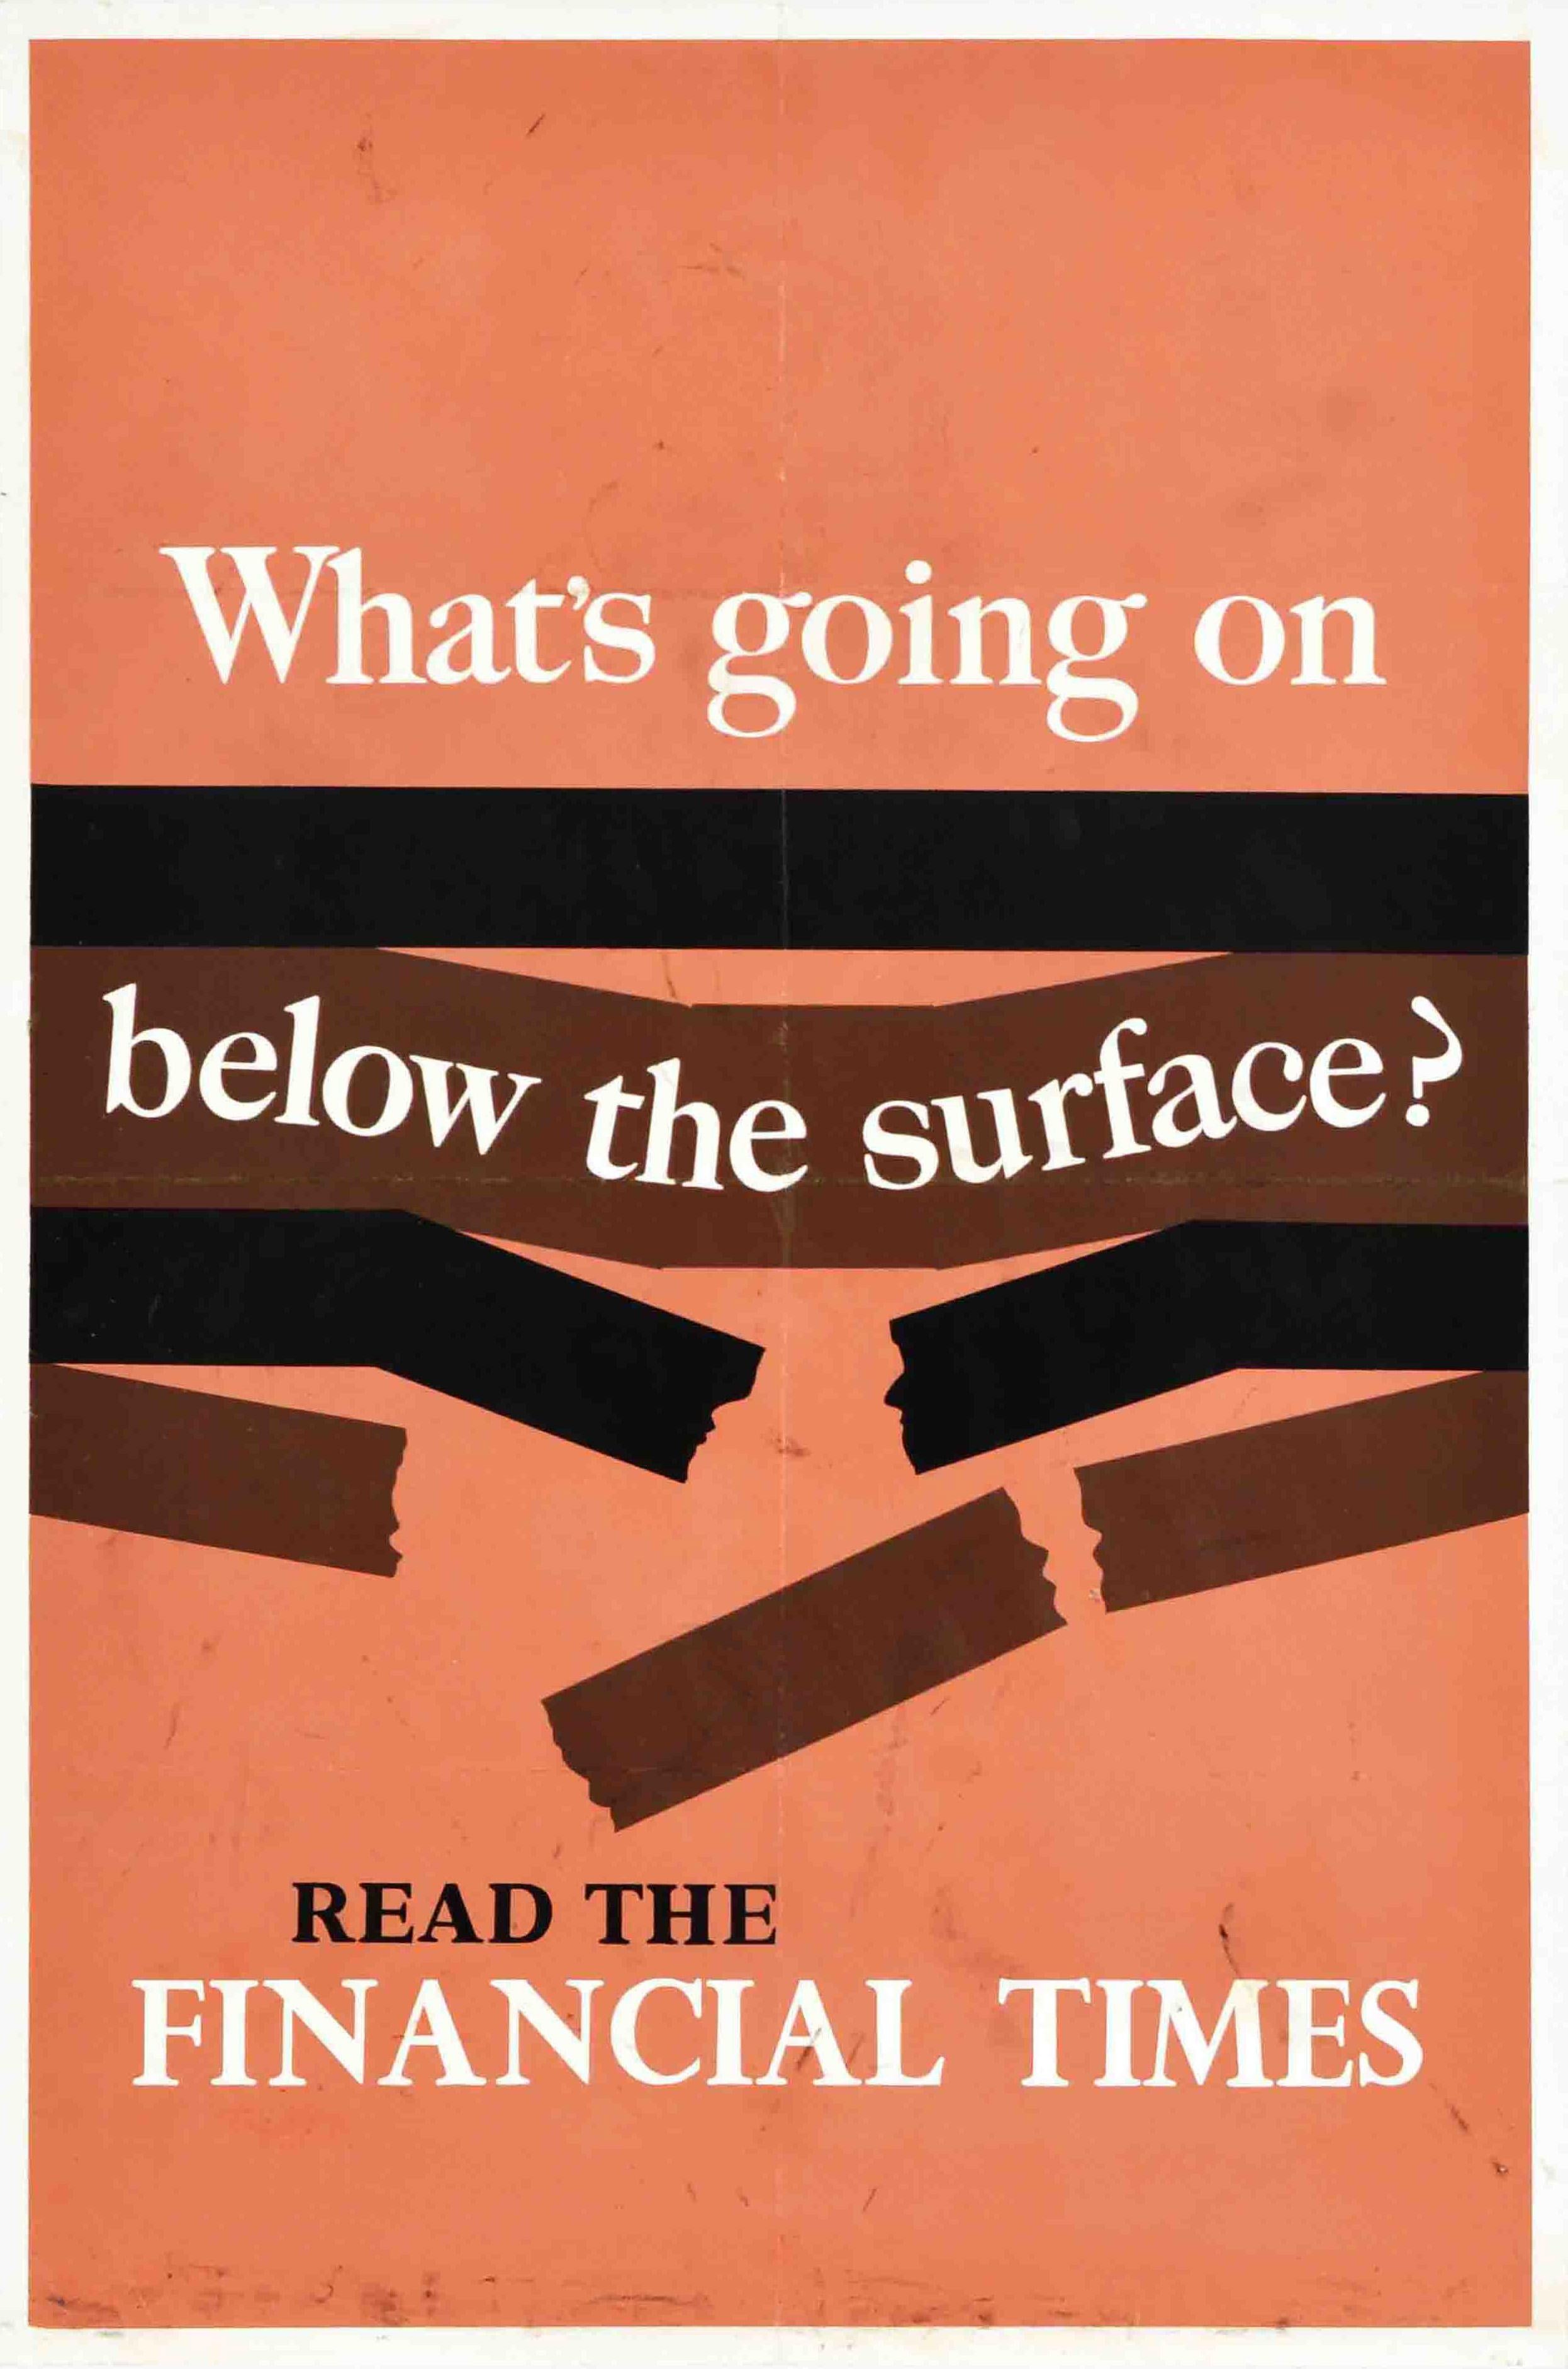 Unknown Print - Original Vintage Advertising Poster Financial Times Below The Surface Newspaper